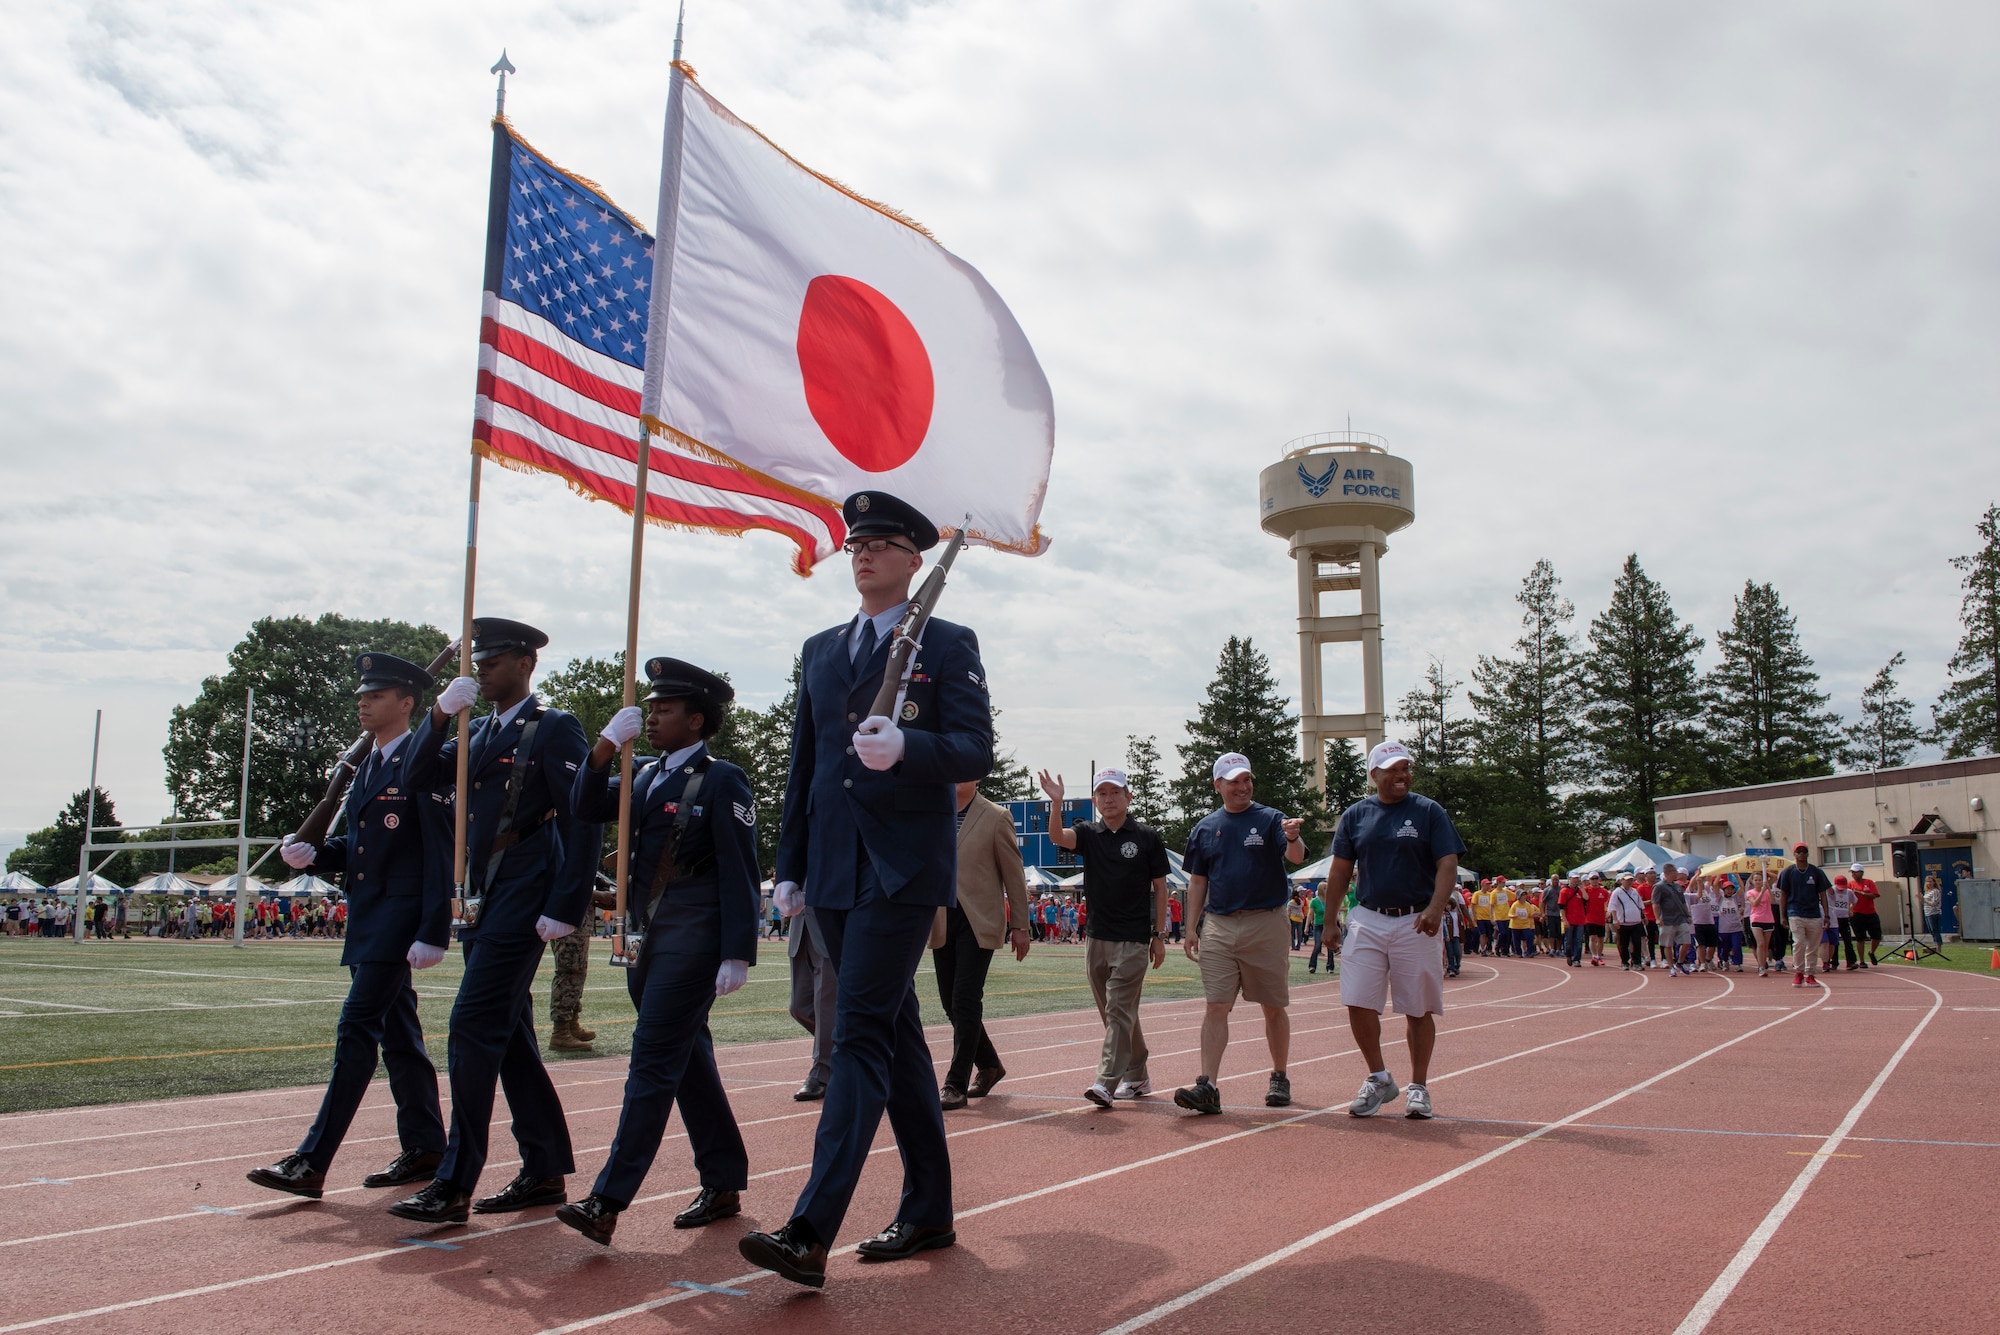 Four Airmen carry the colors at the front of the athlete parade during the Kanto Plains Special Olympics at Yokota Air Base, Japan, May 19, 2018.